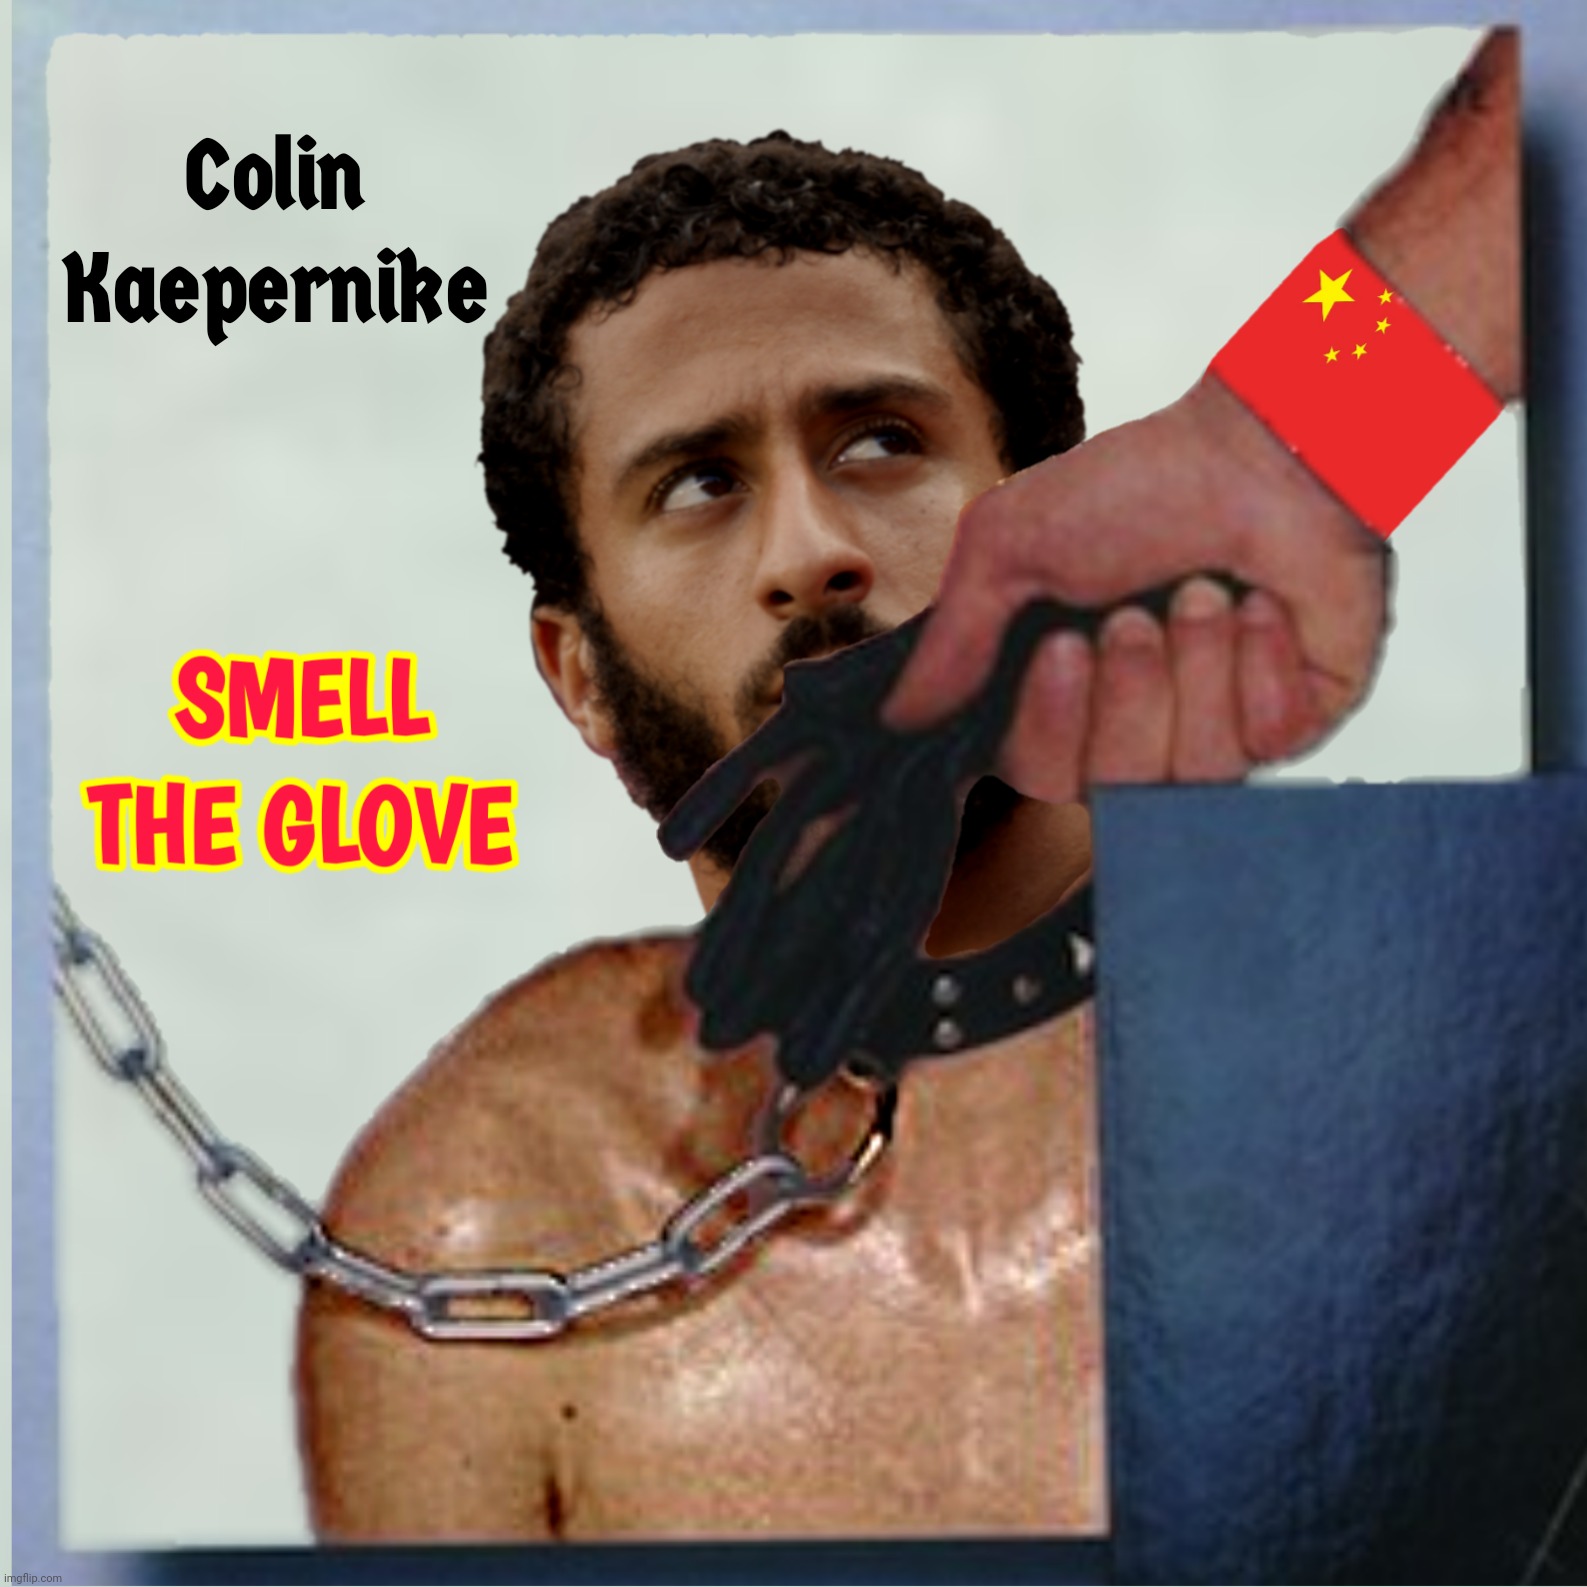 Colin Kaeperknee | image tagged in bad photoshop,colin kaepernick,spinal tap,smell the glove,china | made w/ Imgflip meme maker